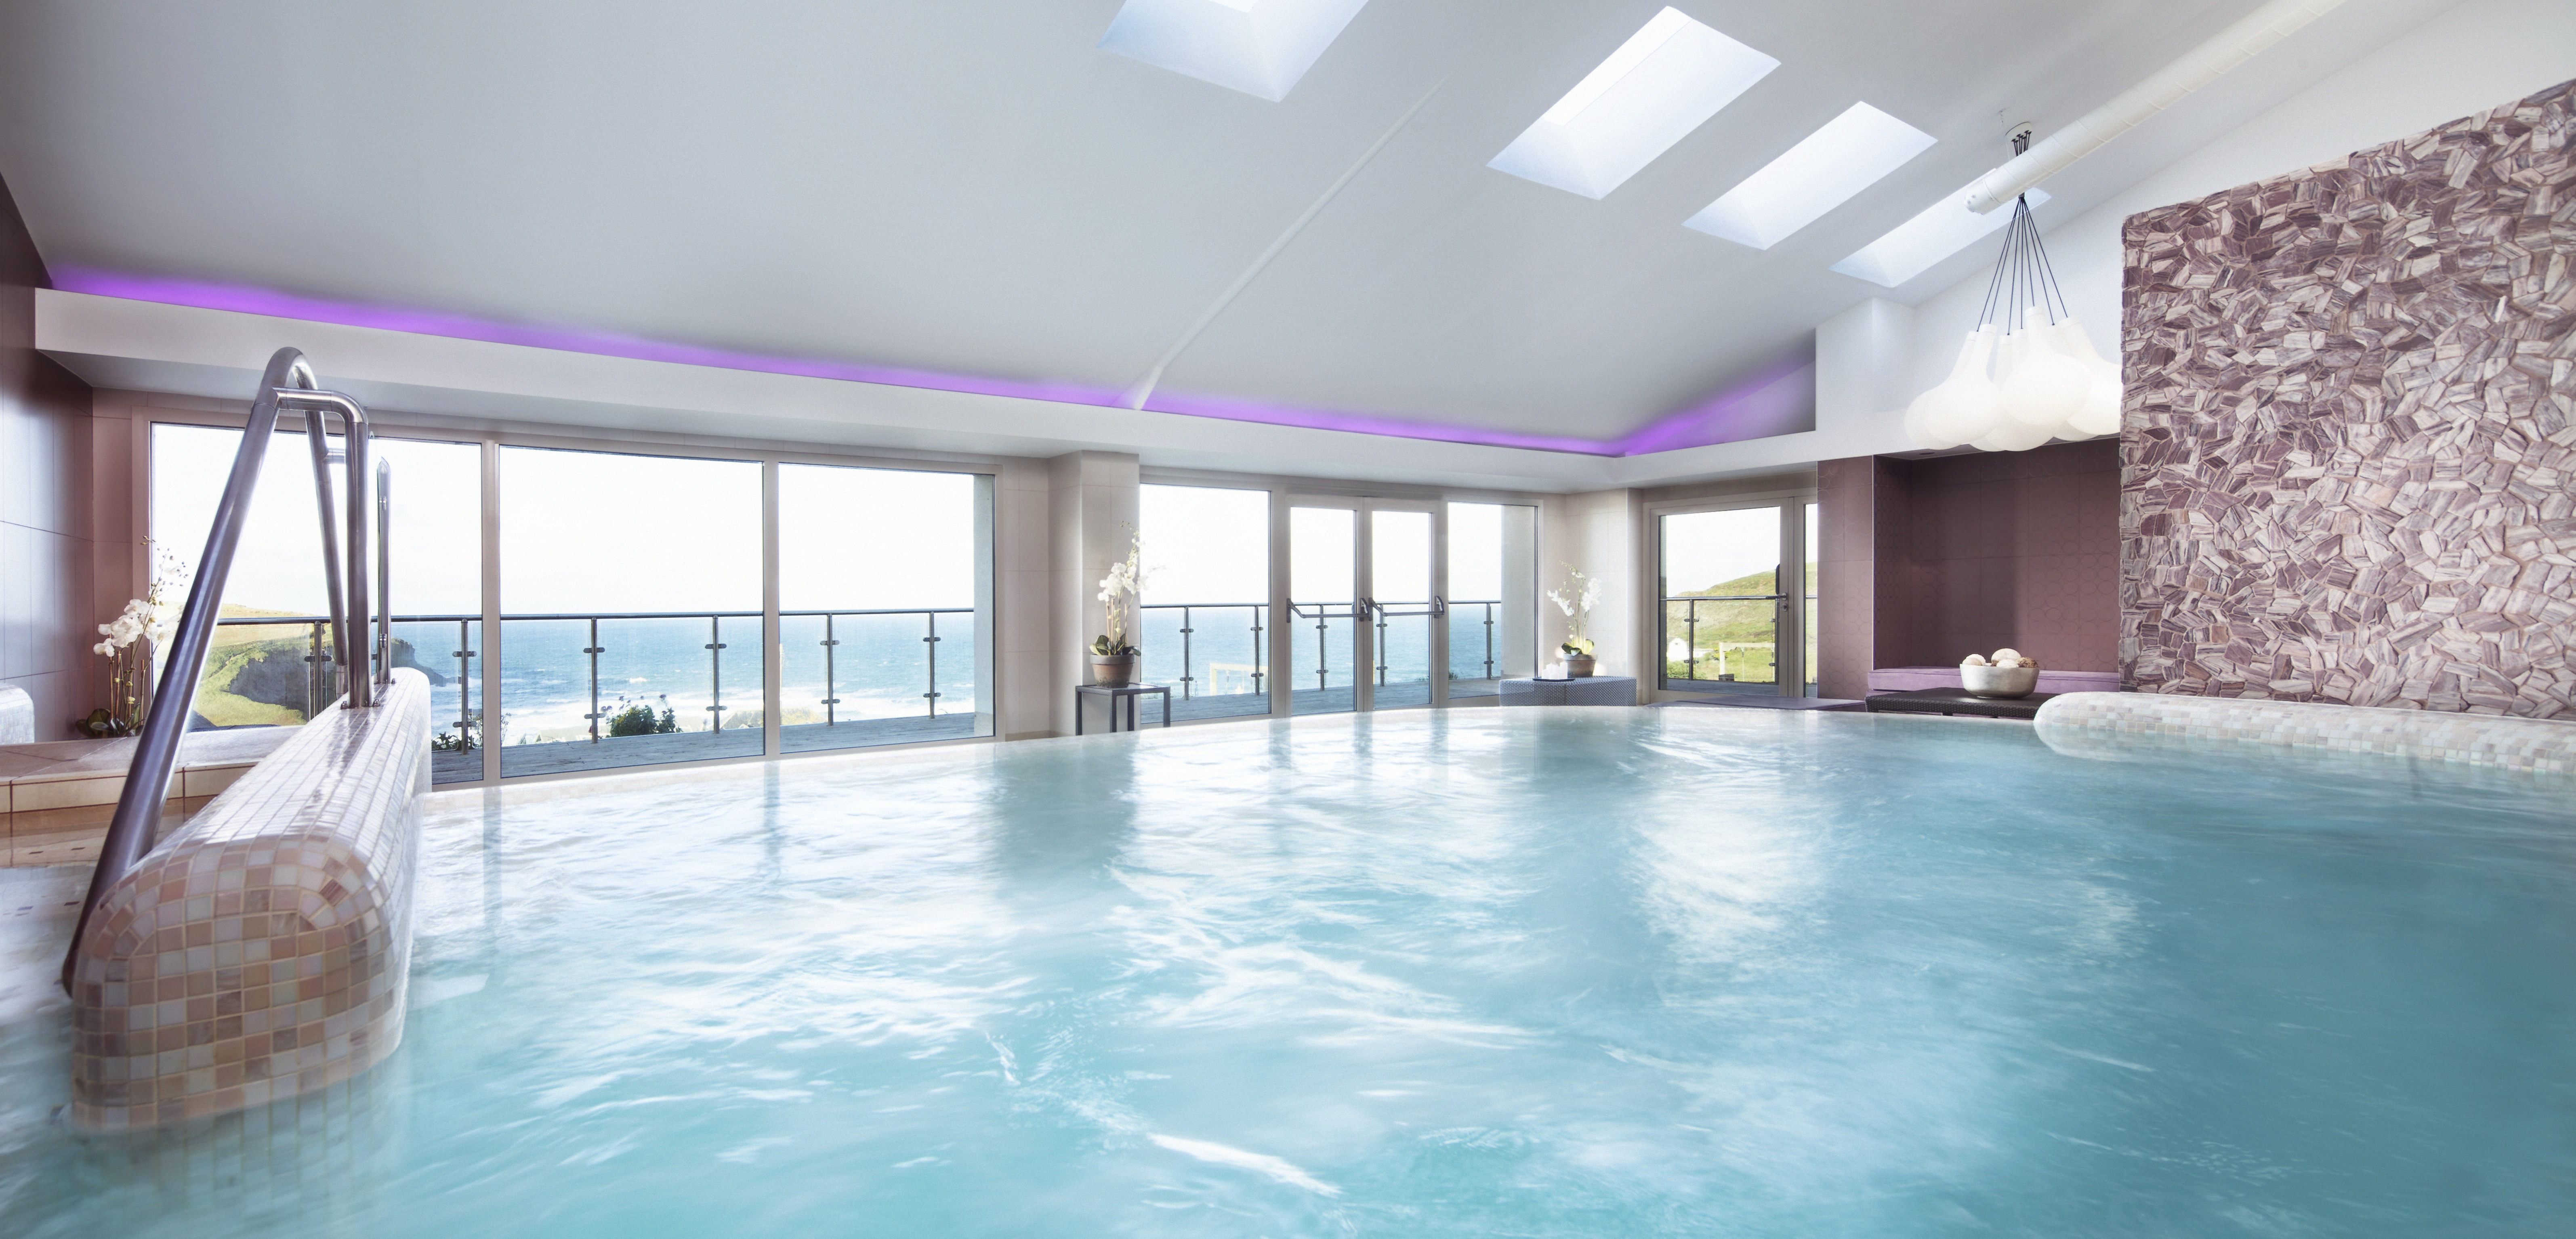 Bedruthan Hotel and Spa - Book Spa Breaks, Days & Weekend Deals from £55